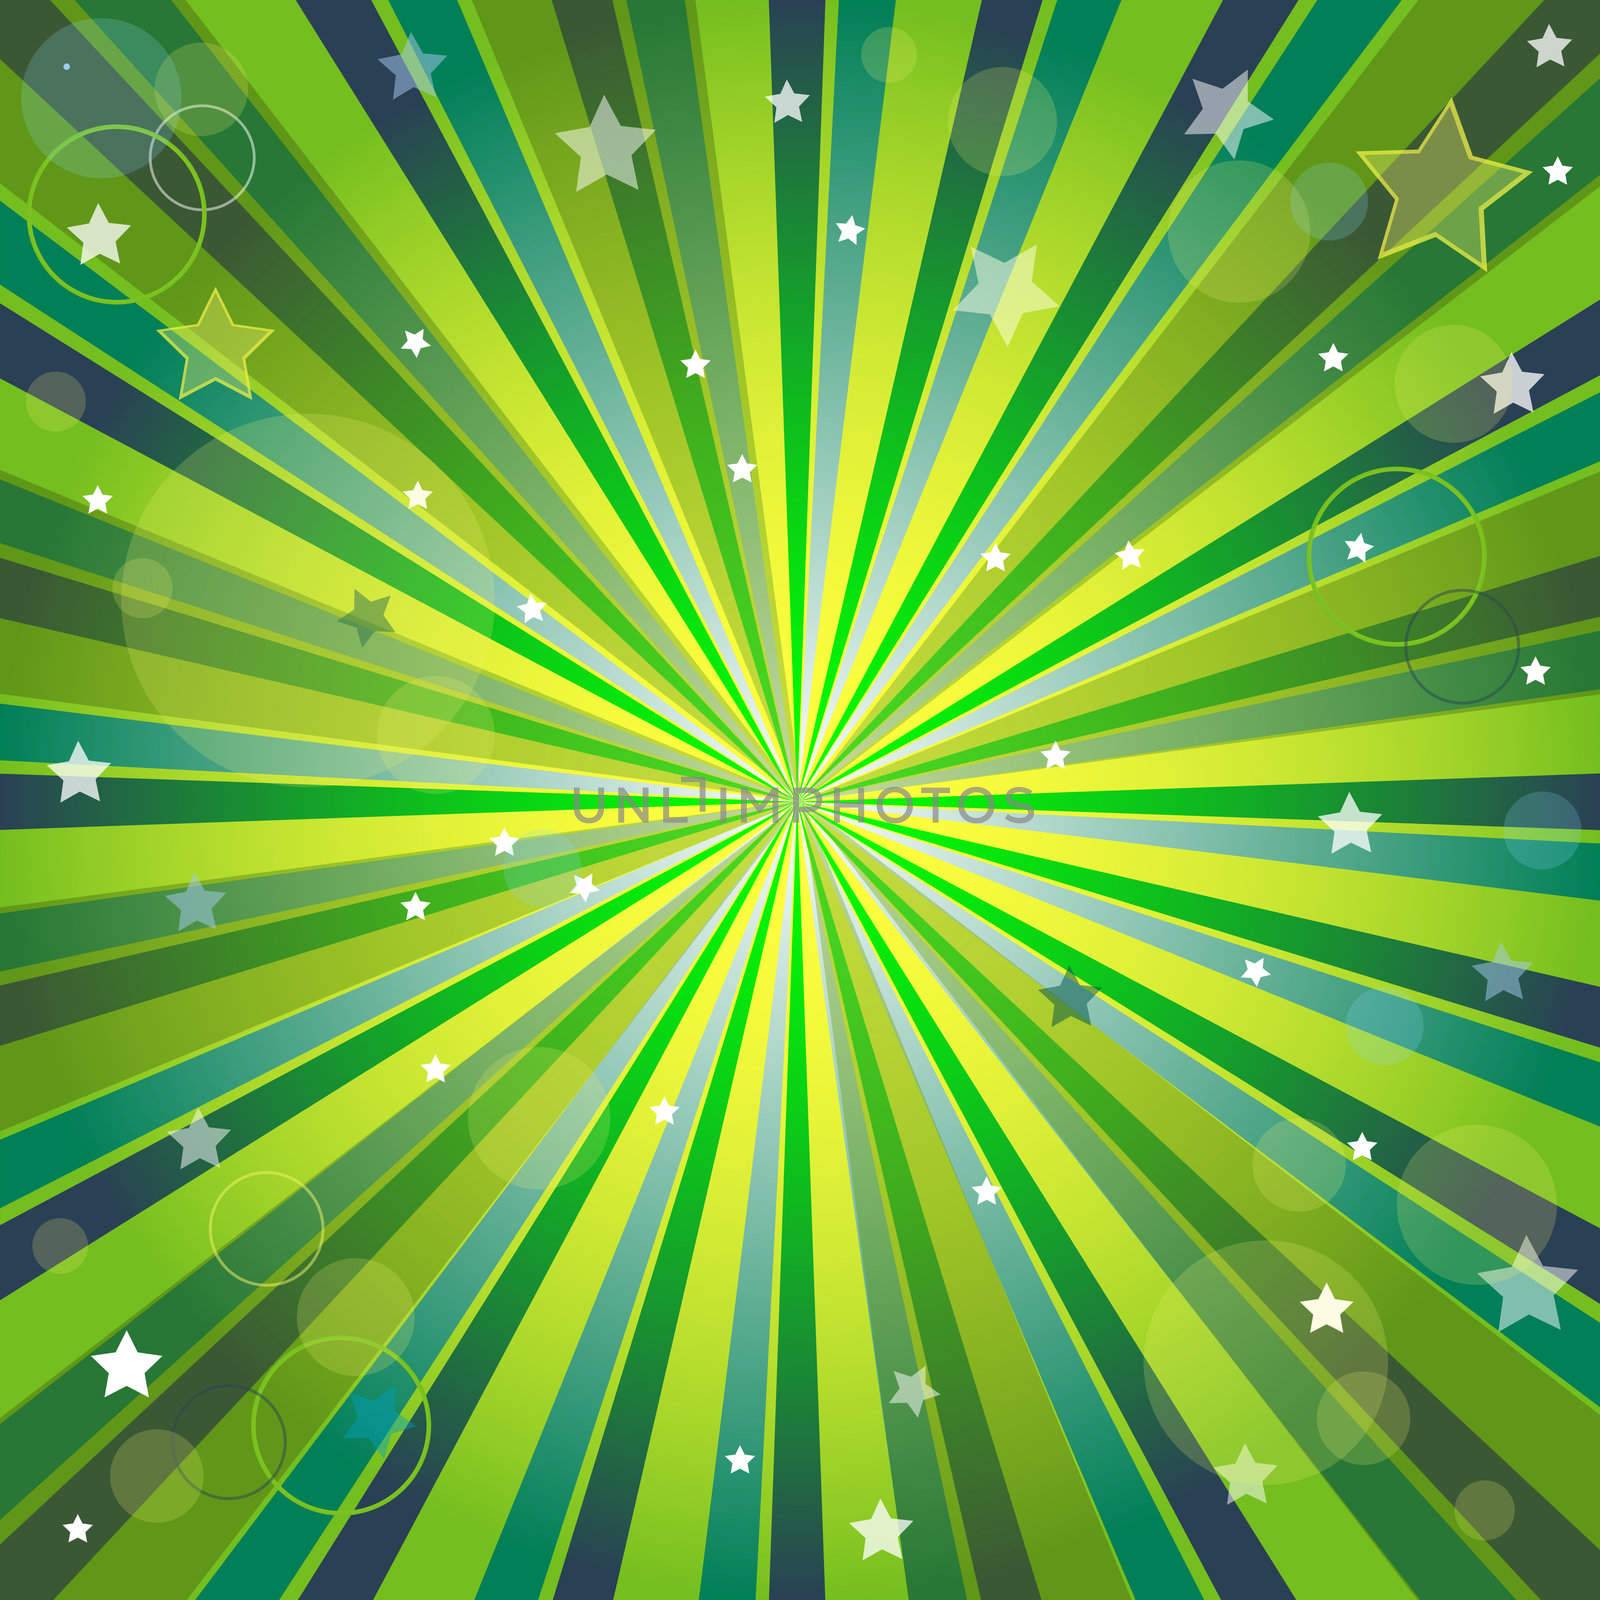 Abstract green and yellow background with rays by OlgaDrozd